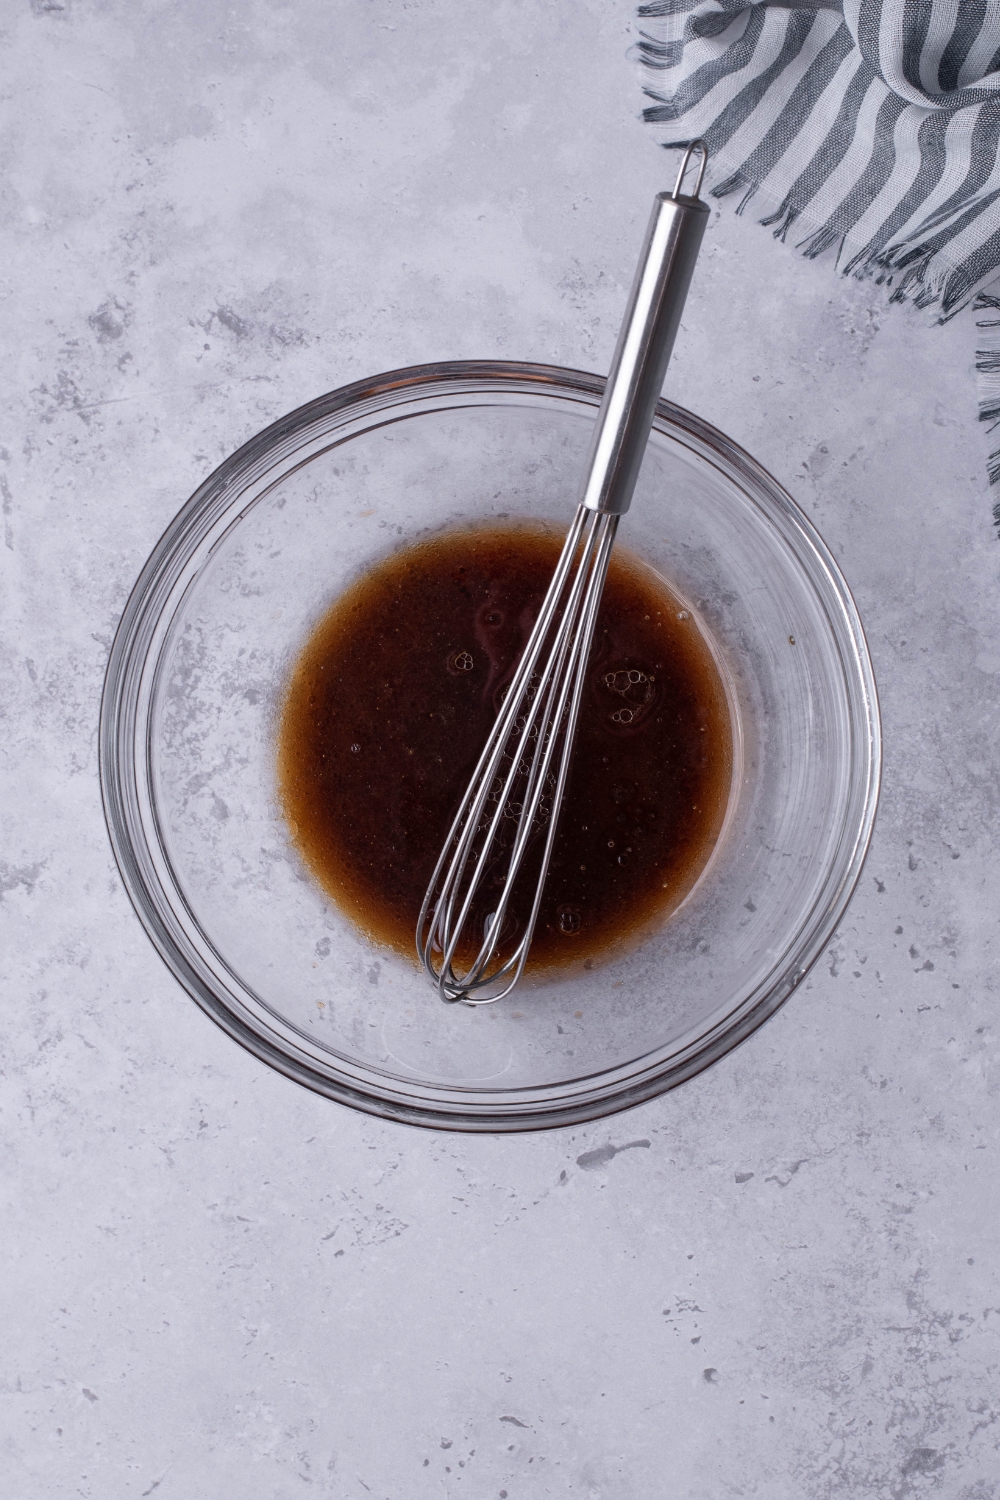 A mixing bowl with spicy sauce and a whisk.